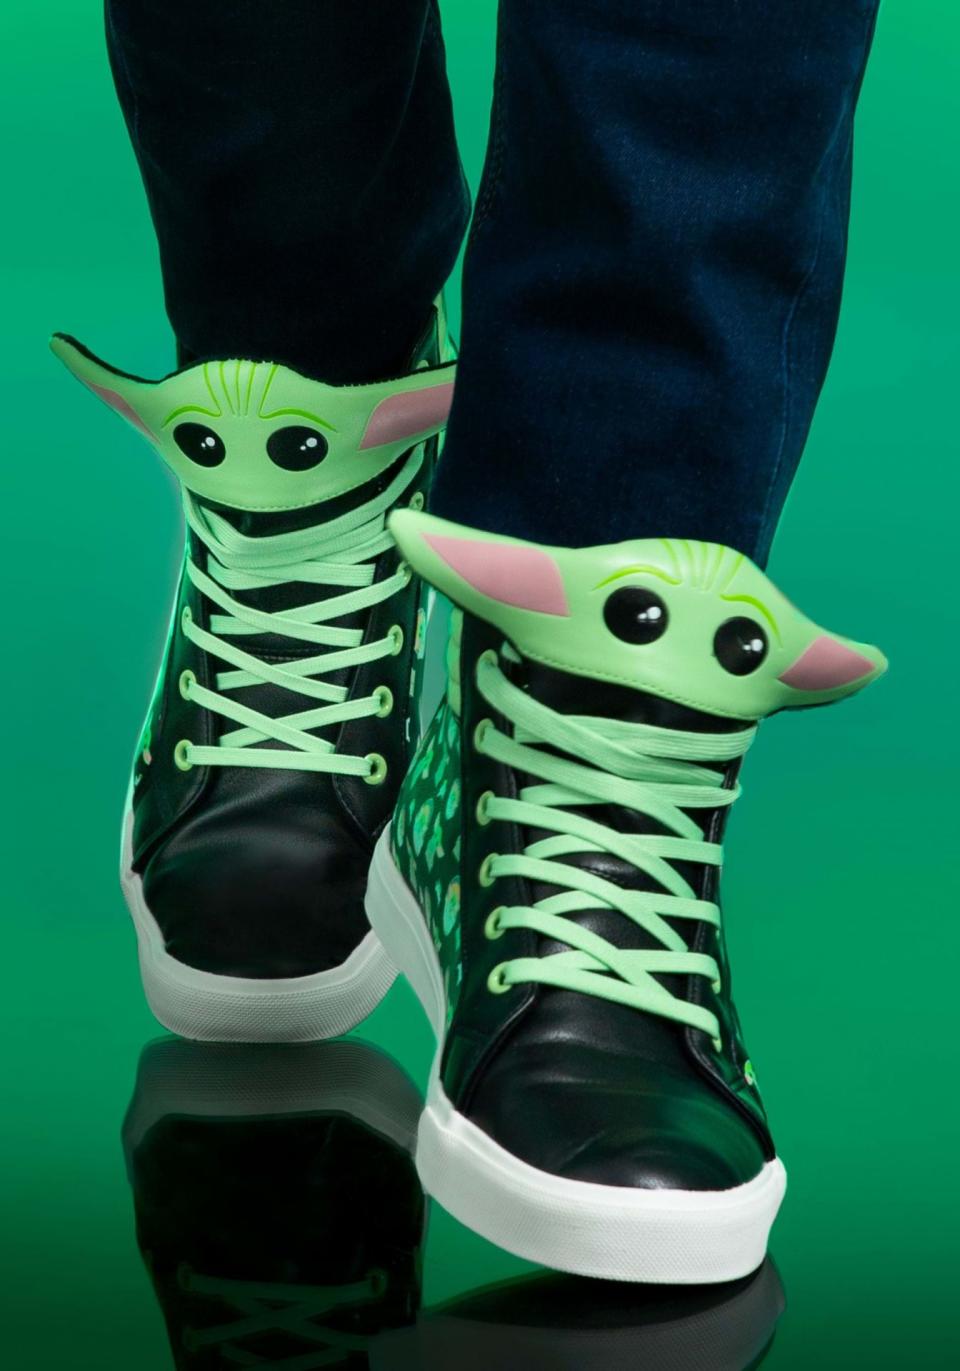 Show your love for Baby Yoda with these incredible (and very green) shoes from Fun.com